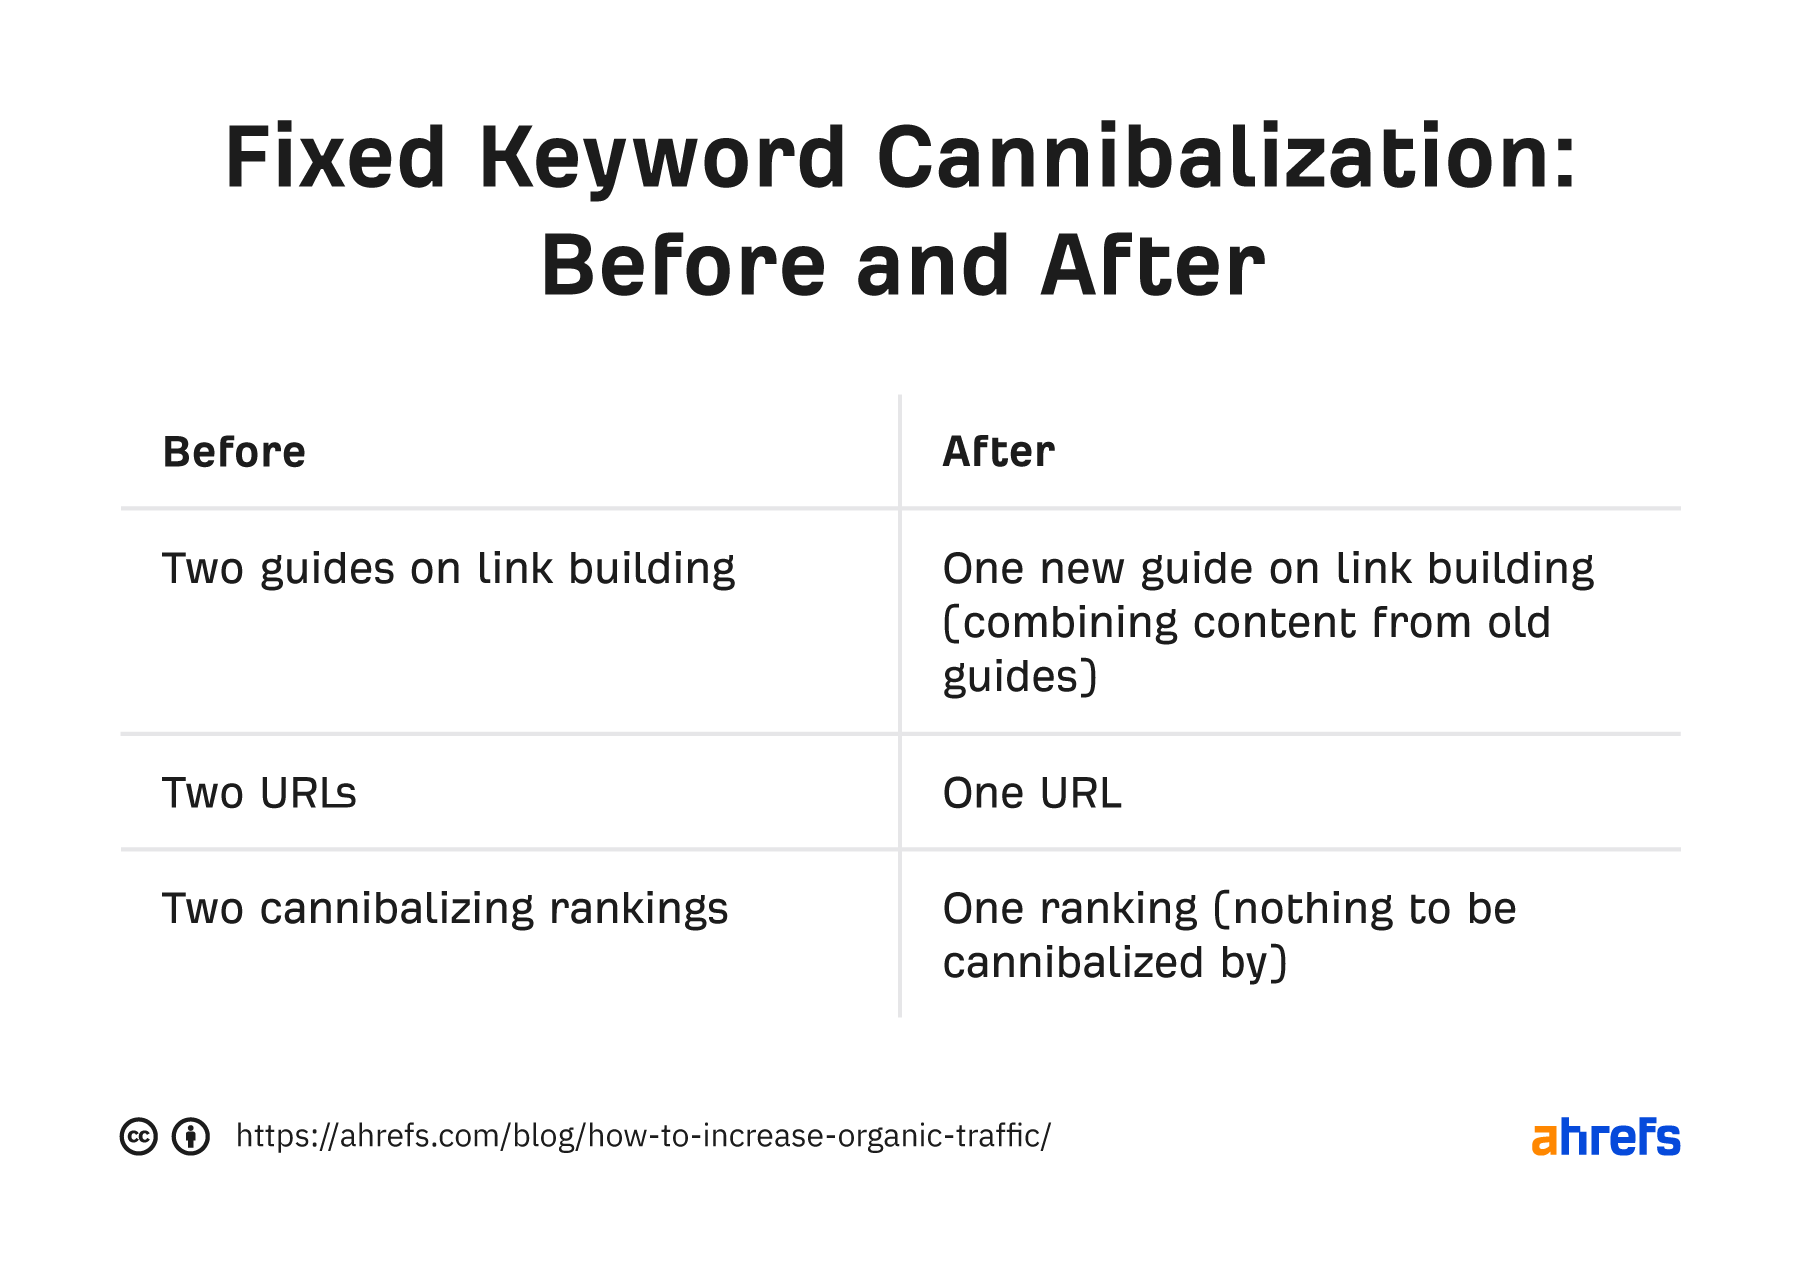 Fixed keyword cannibalization: before and after